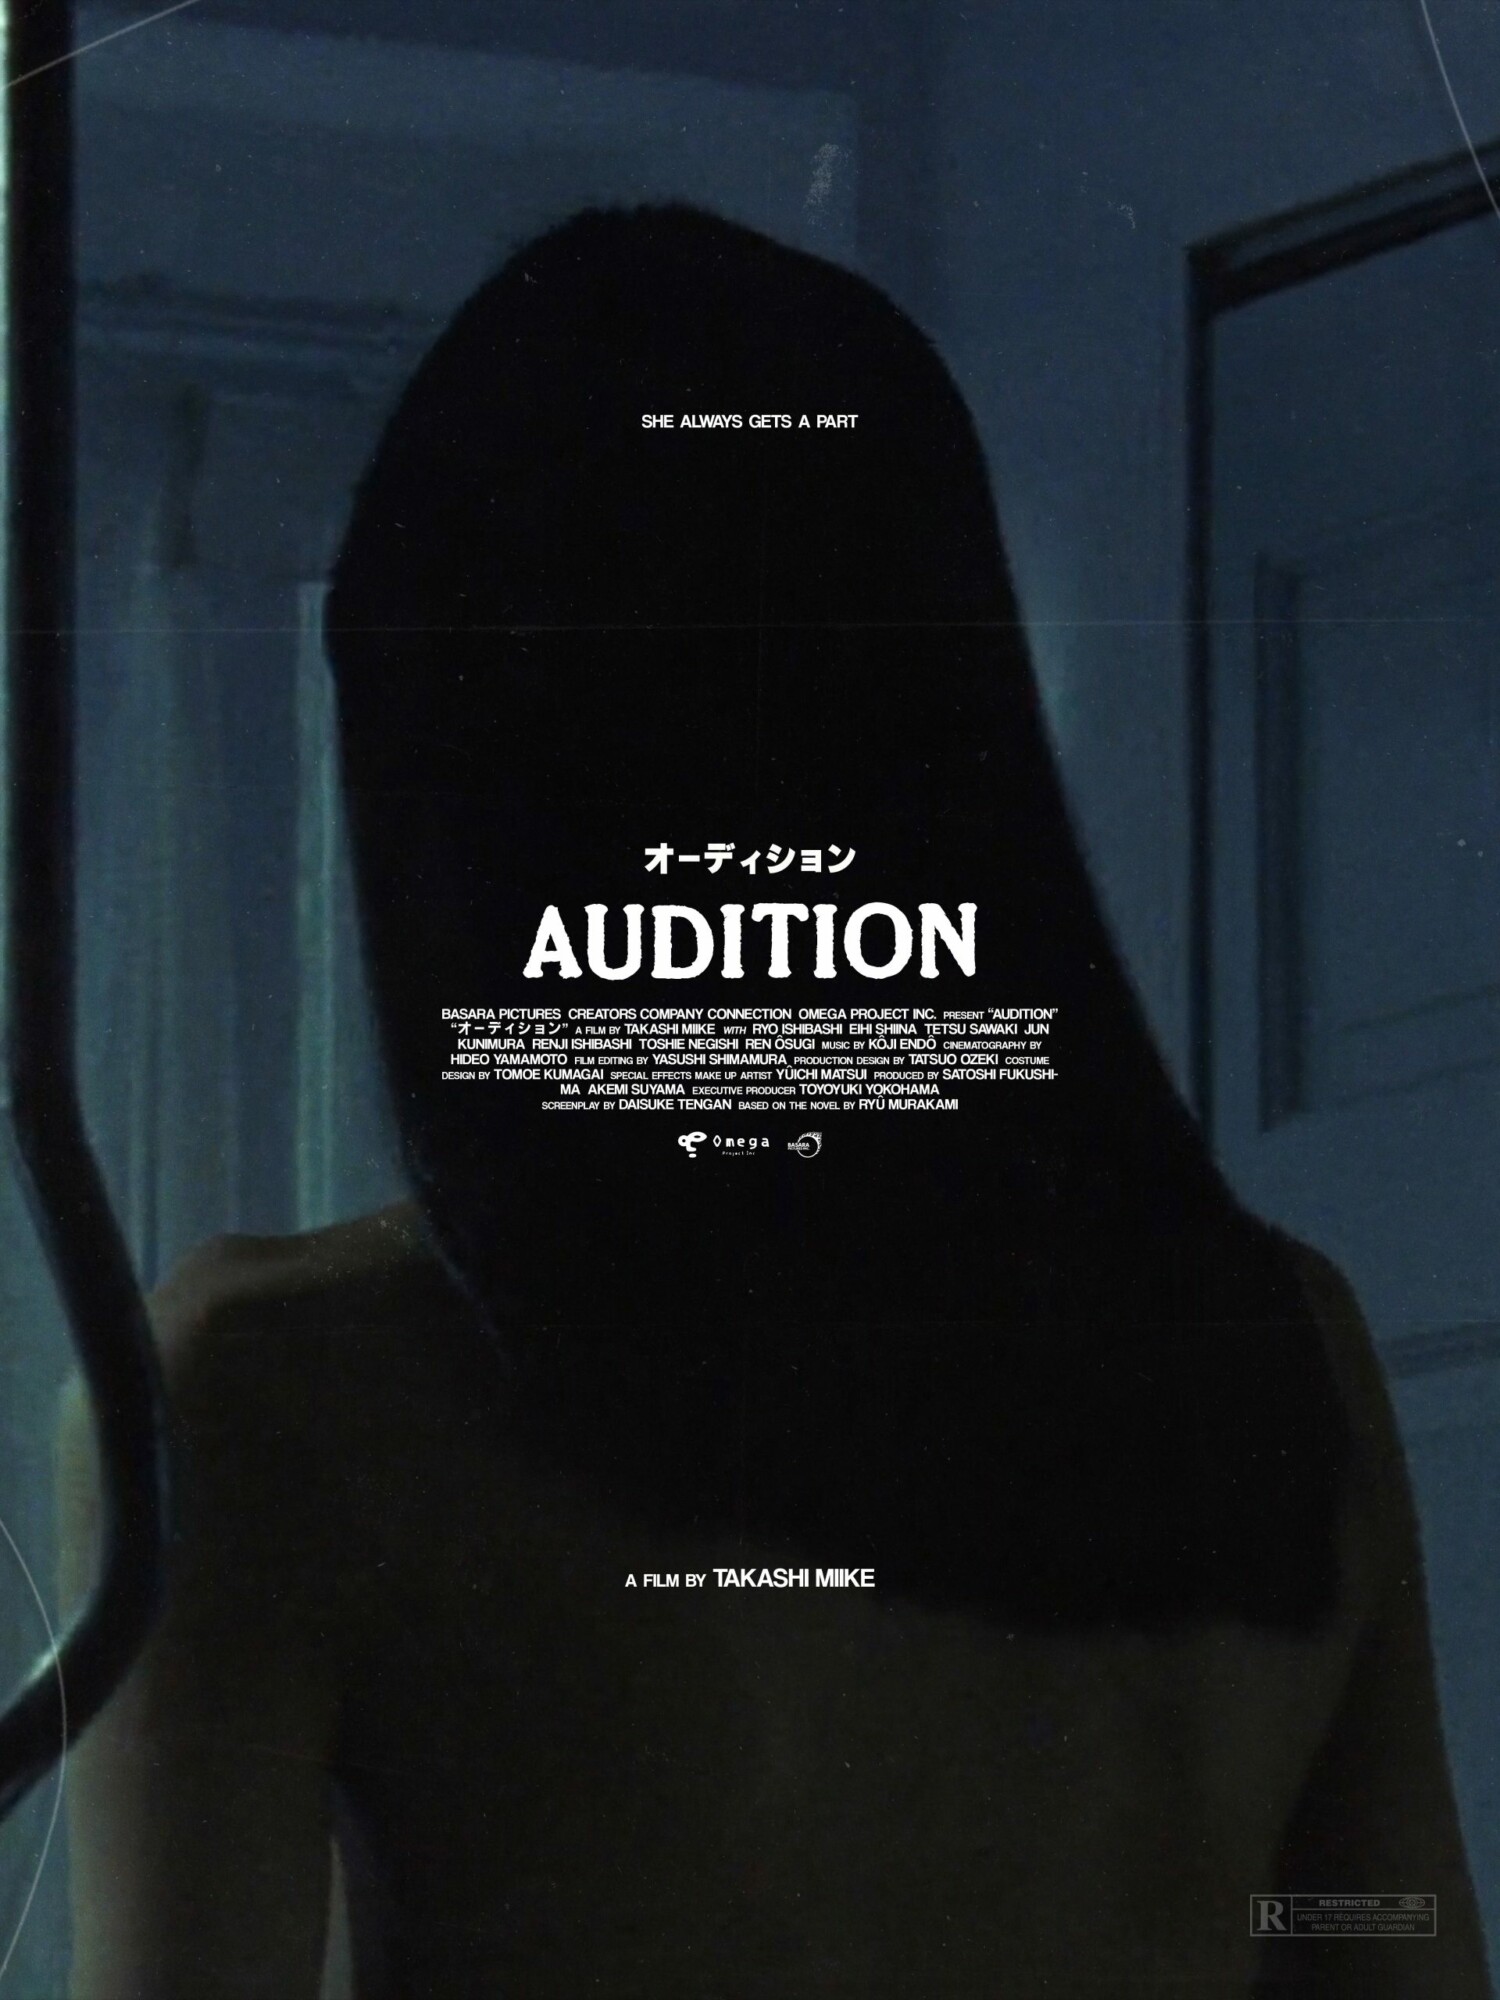 Audition (1999)